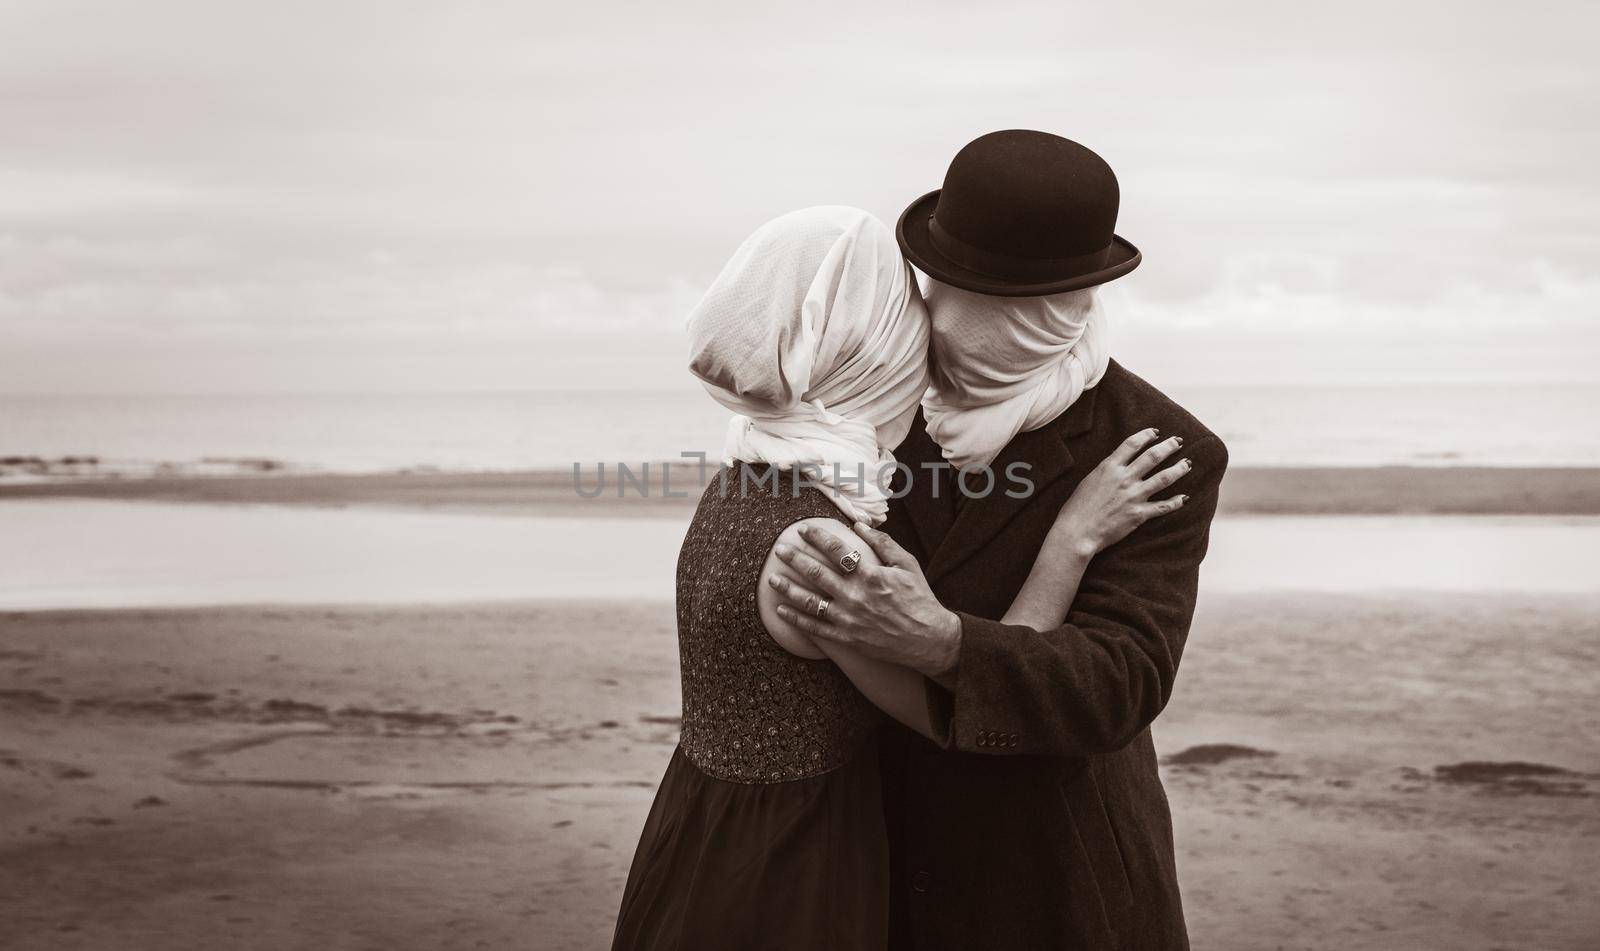 Faceless portrait of man kissing woman with white fabrics on their heads. Image in vintage retro style. Sepia toned and film grain added